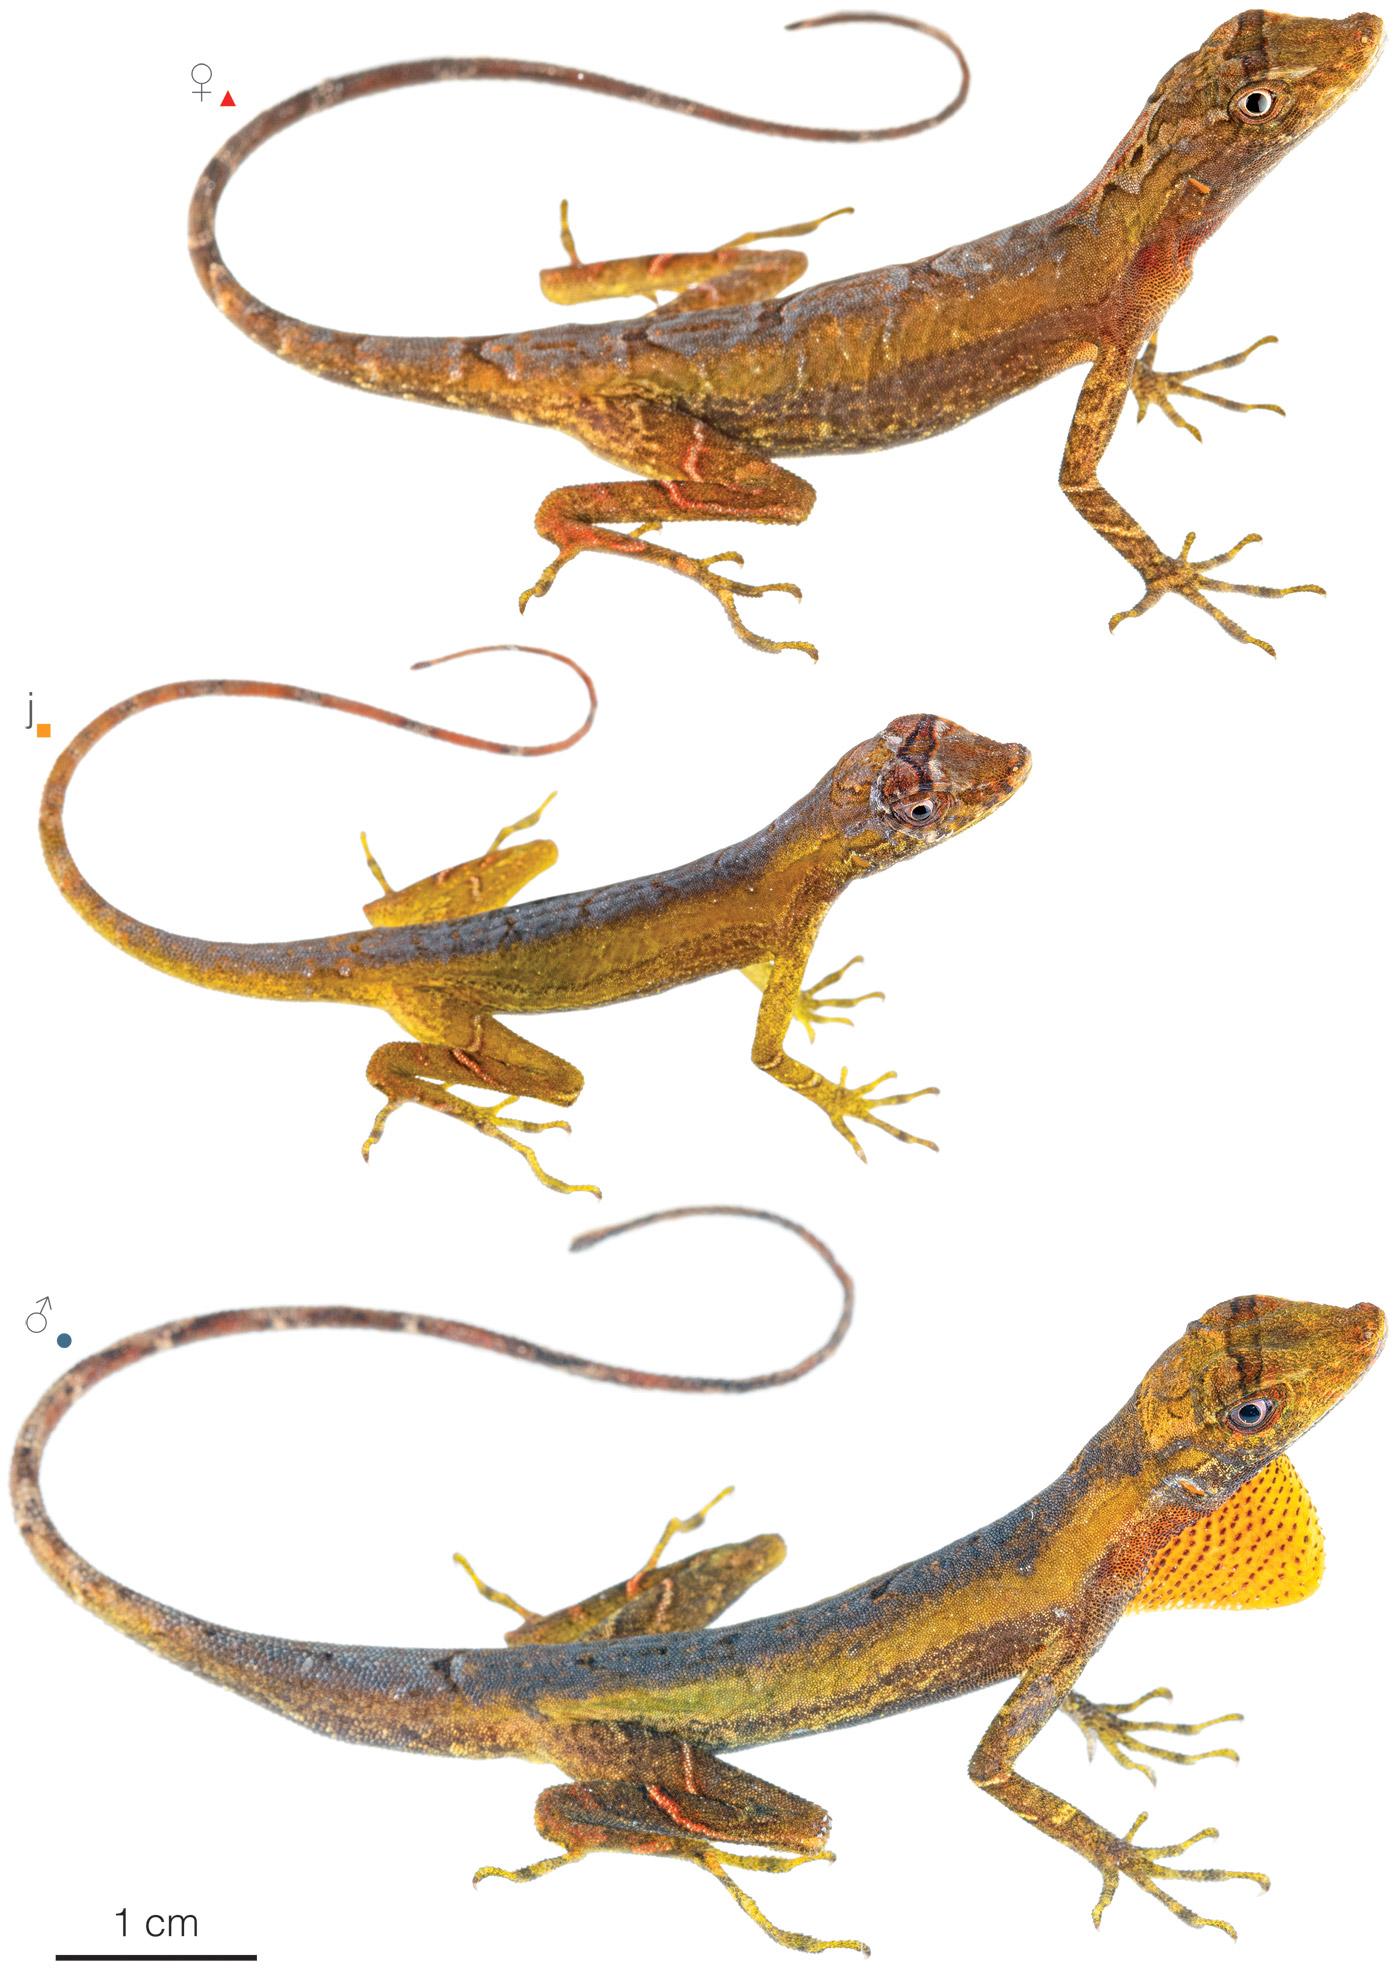 Figure showing variation among individuals of Anolis trachyderma